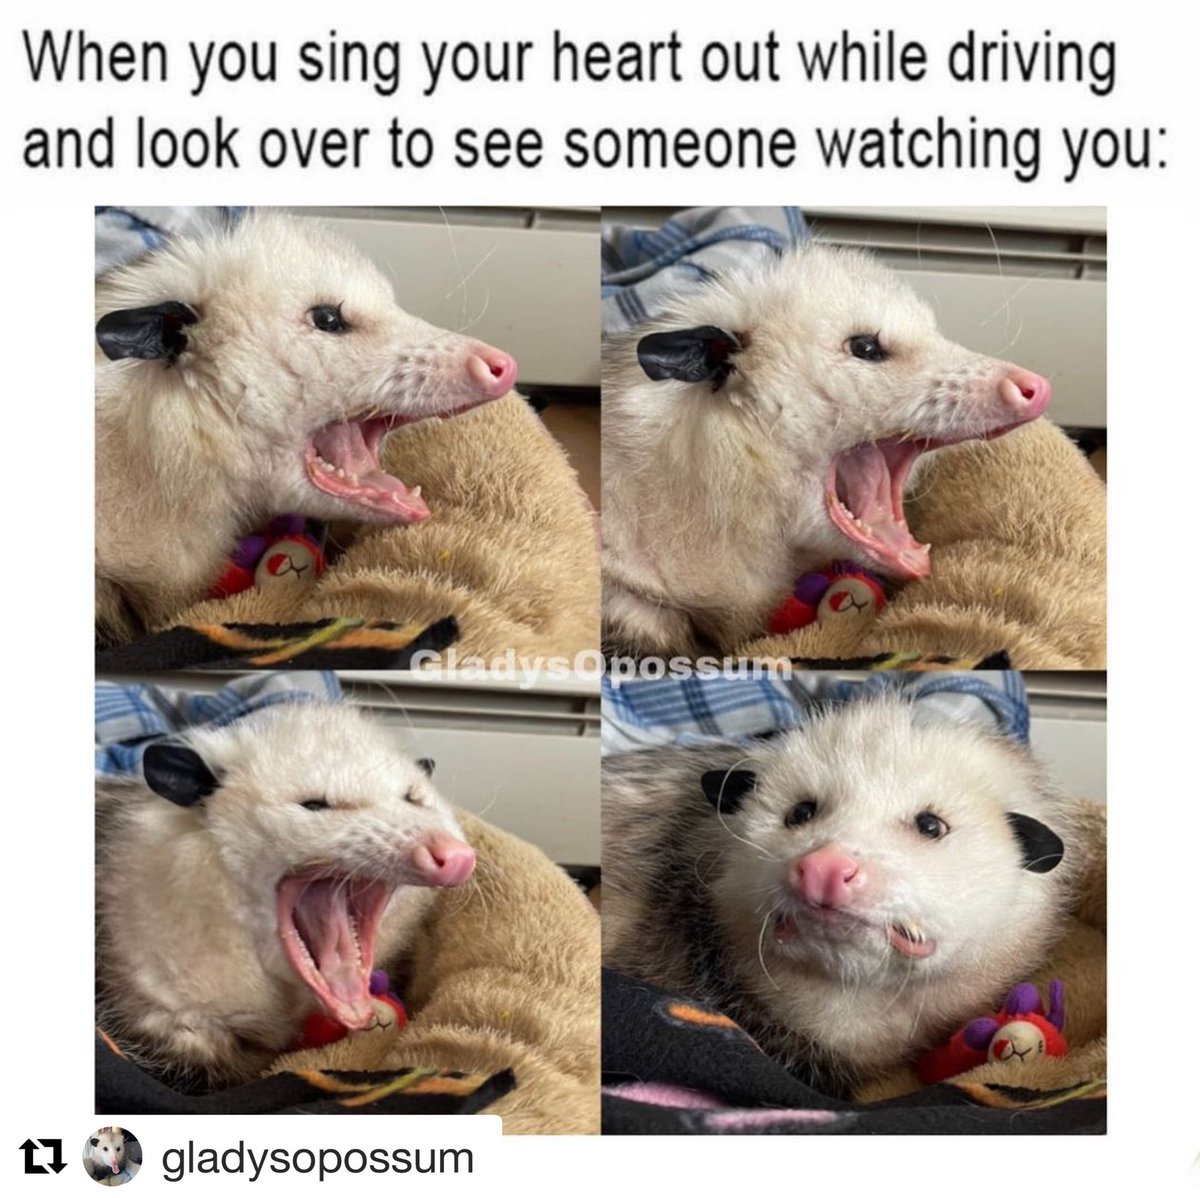 funny memes - dank memes - opossum meme - When you sing your heart out while driving and look over to see someone watching you Gladys Opossum t gladysopossum